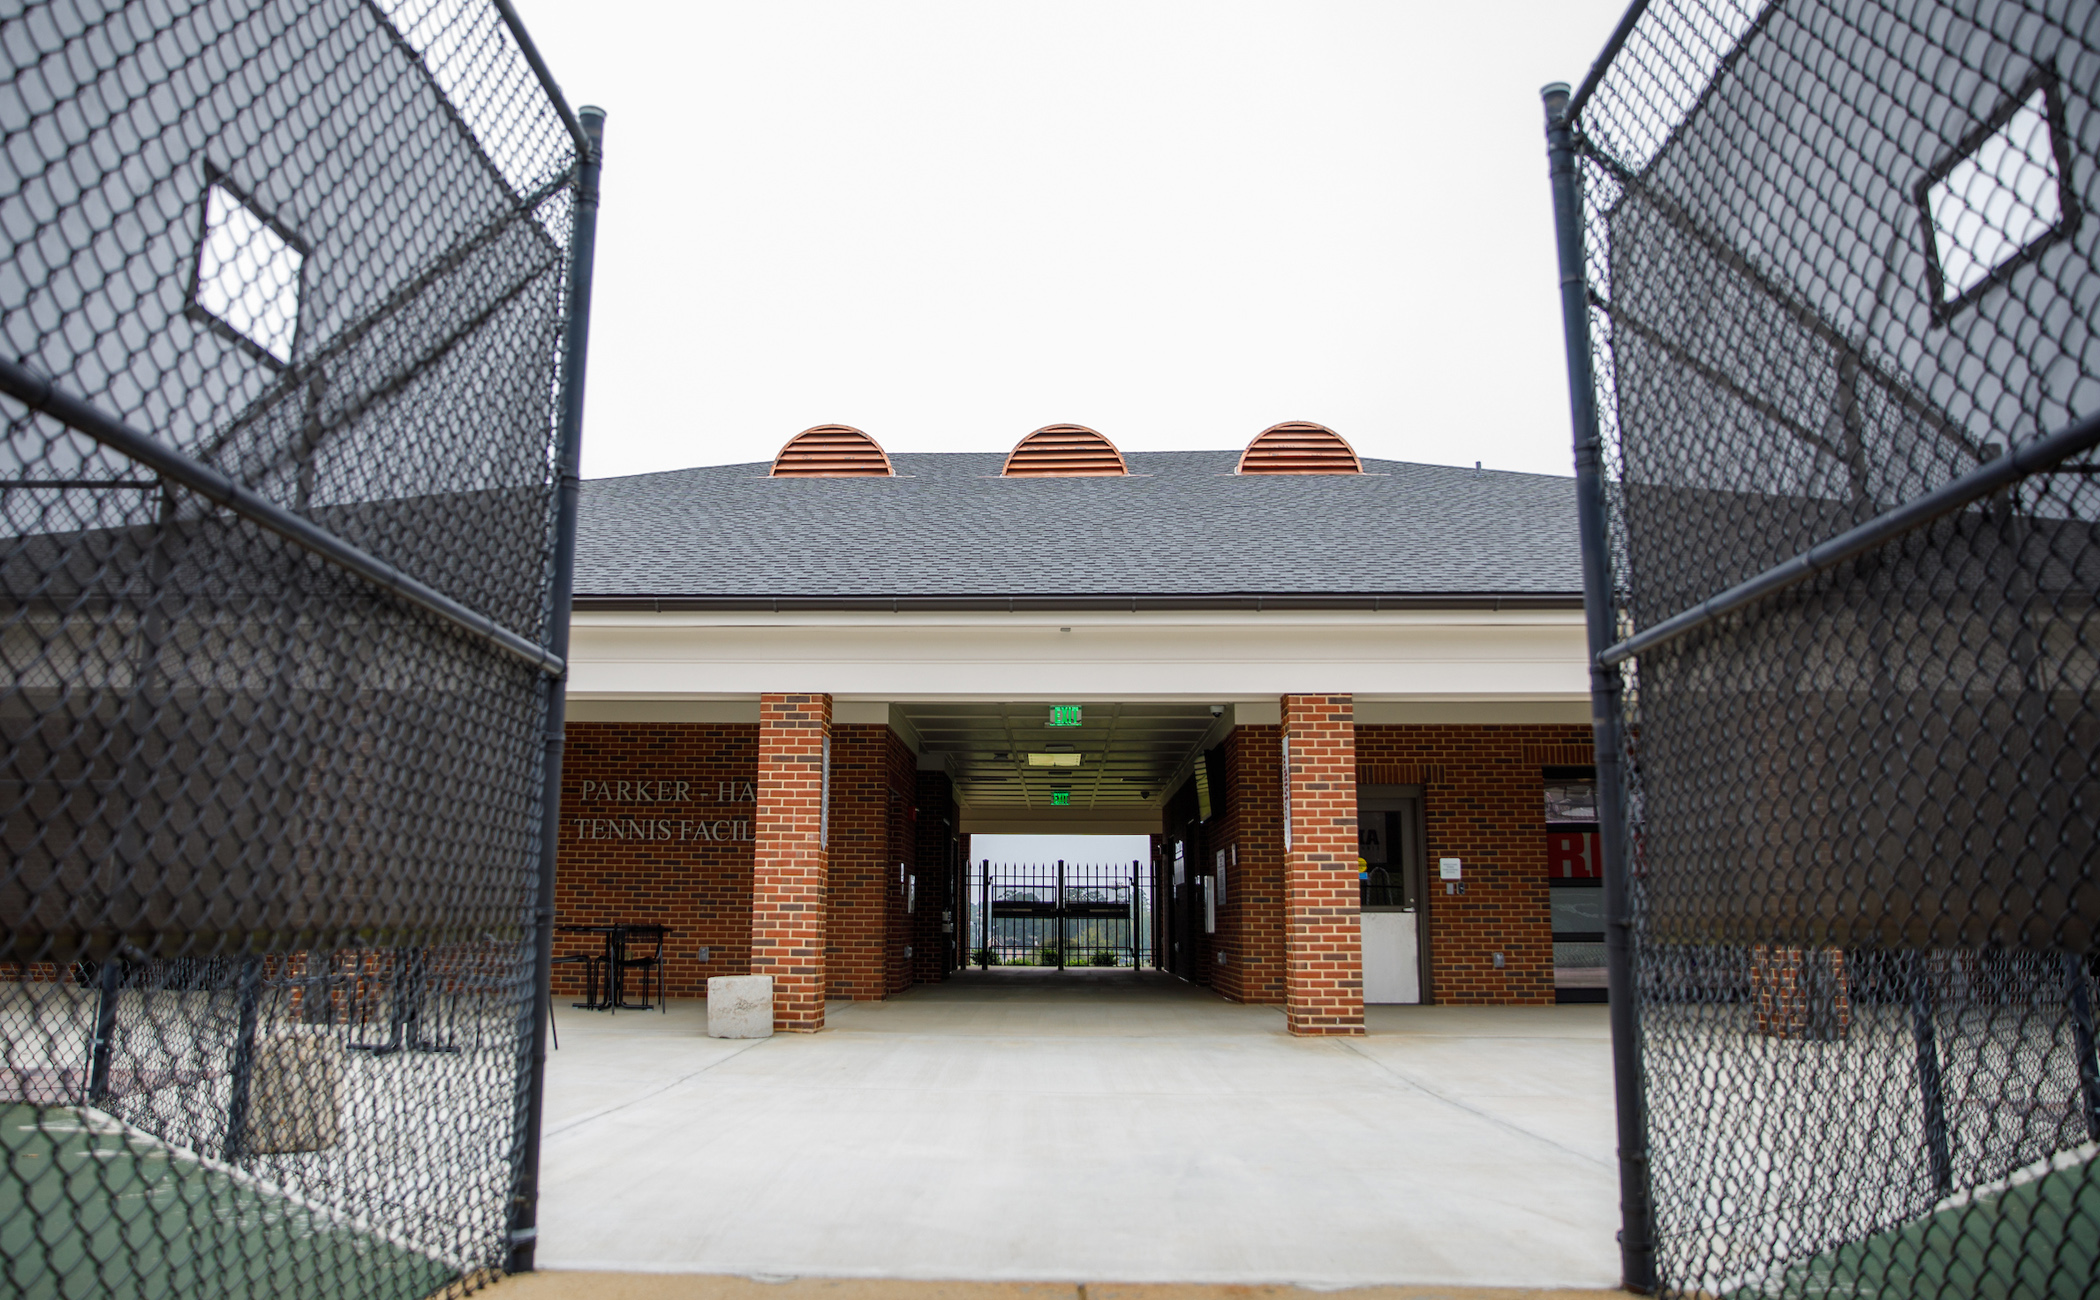 The exterior of the Parker Haun Tennis Facility between two tennis courts